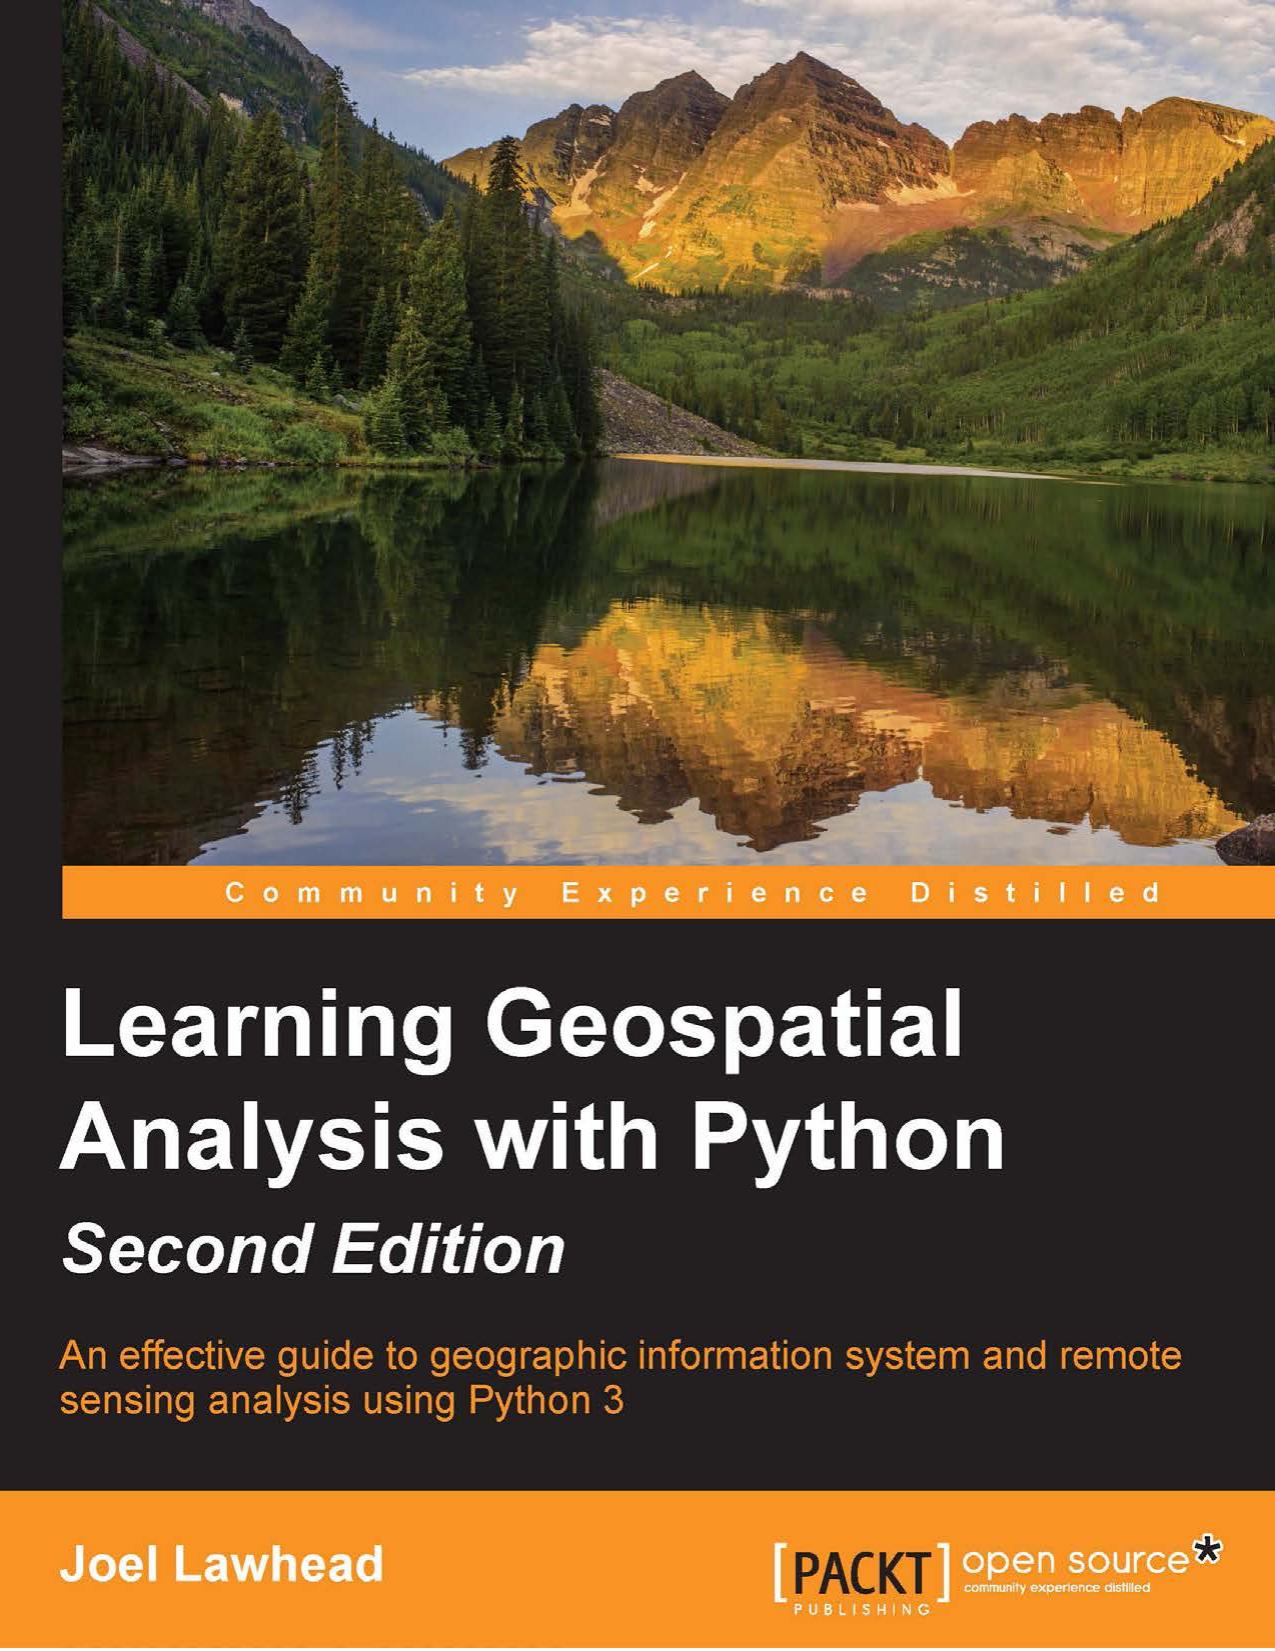 Python guide to geographic information system and remote sensing 2019